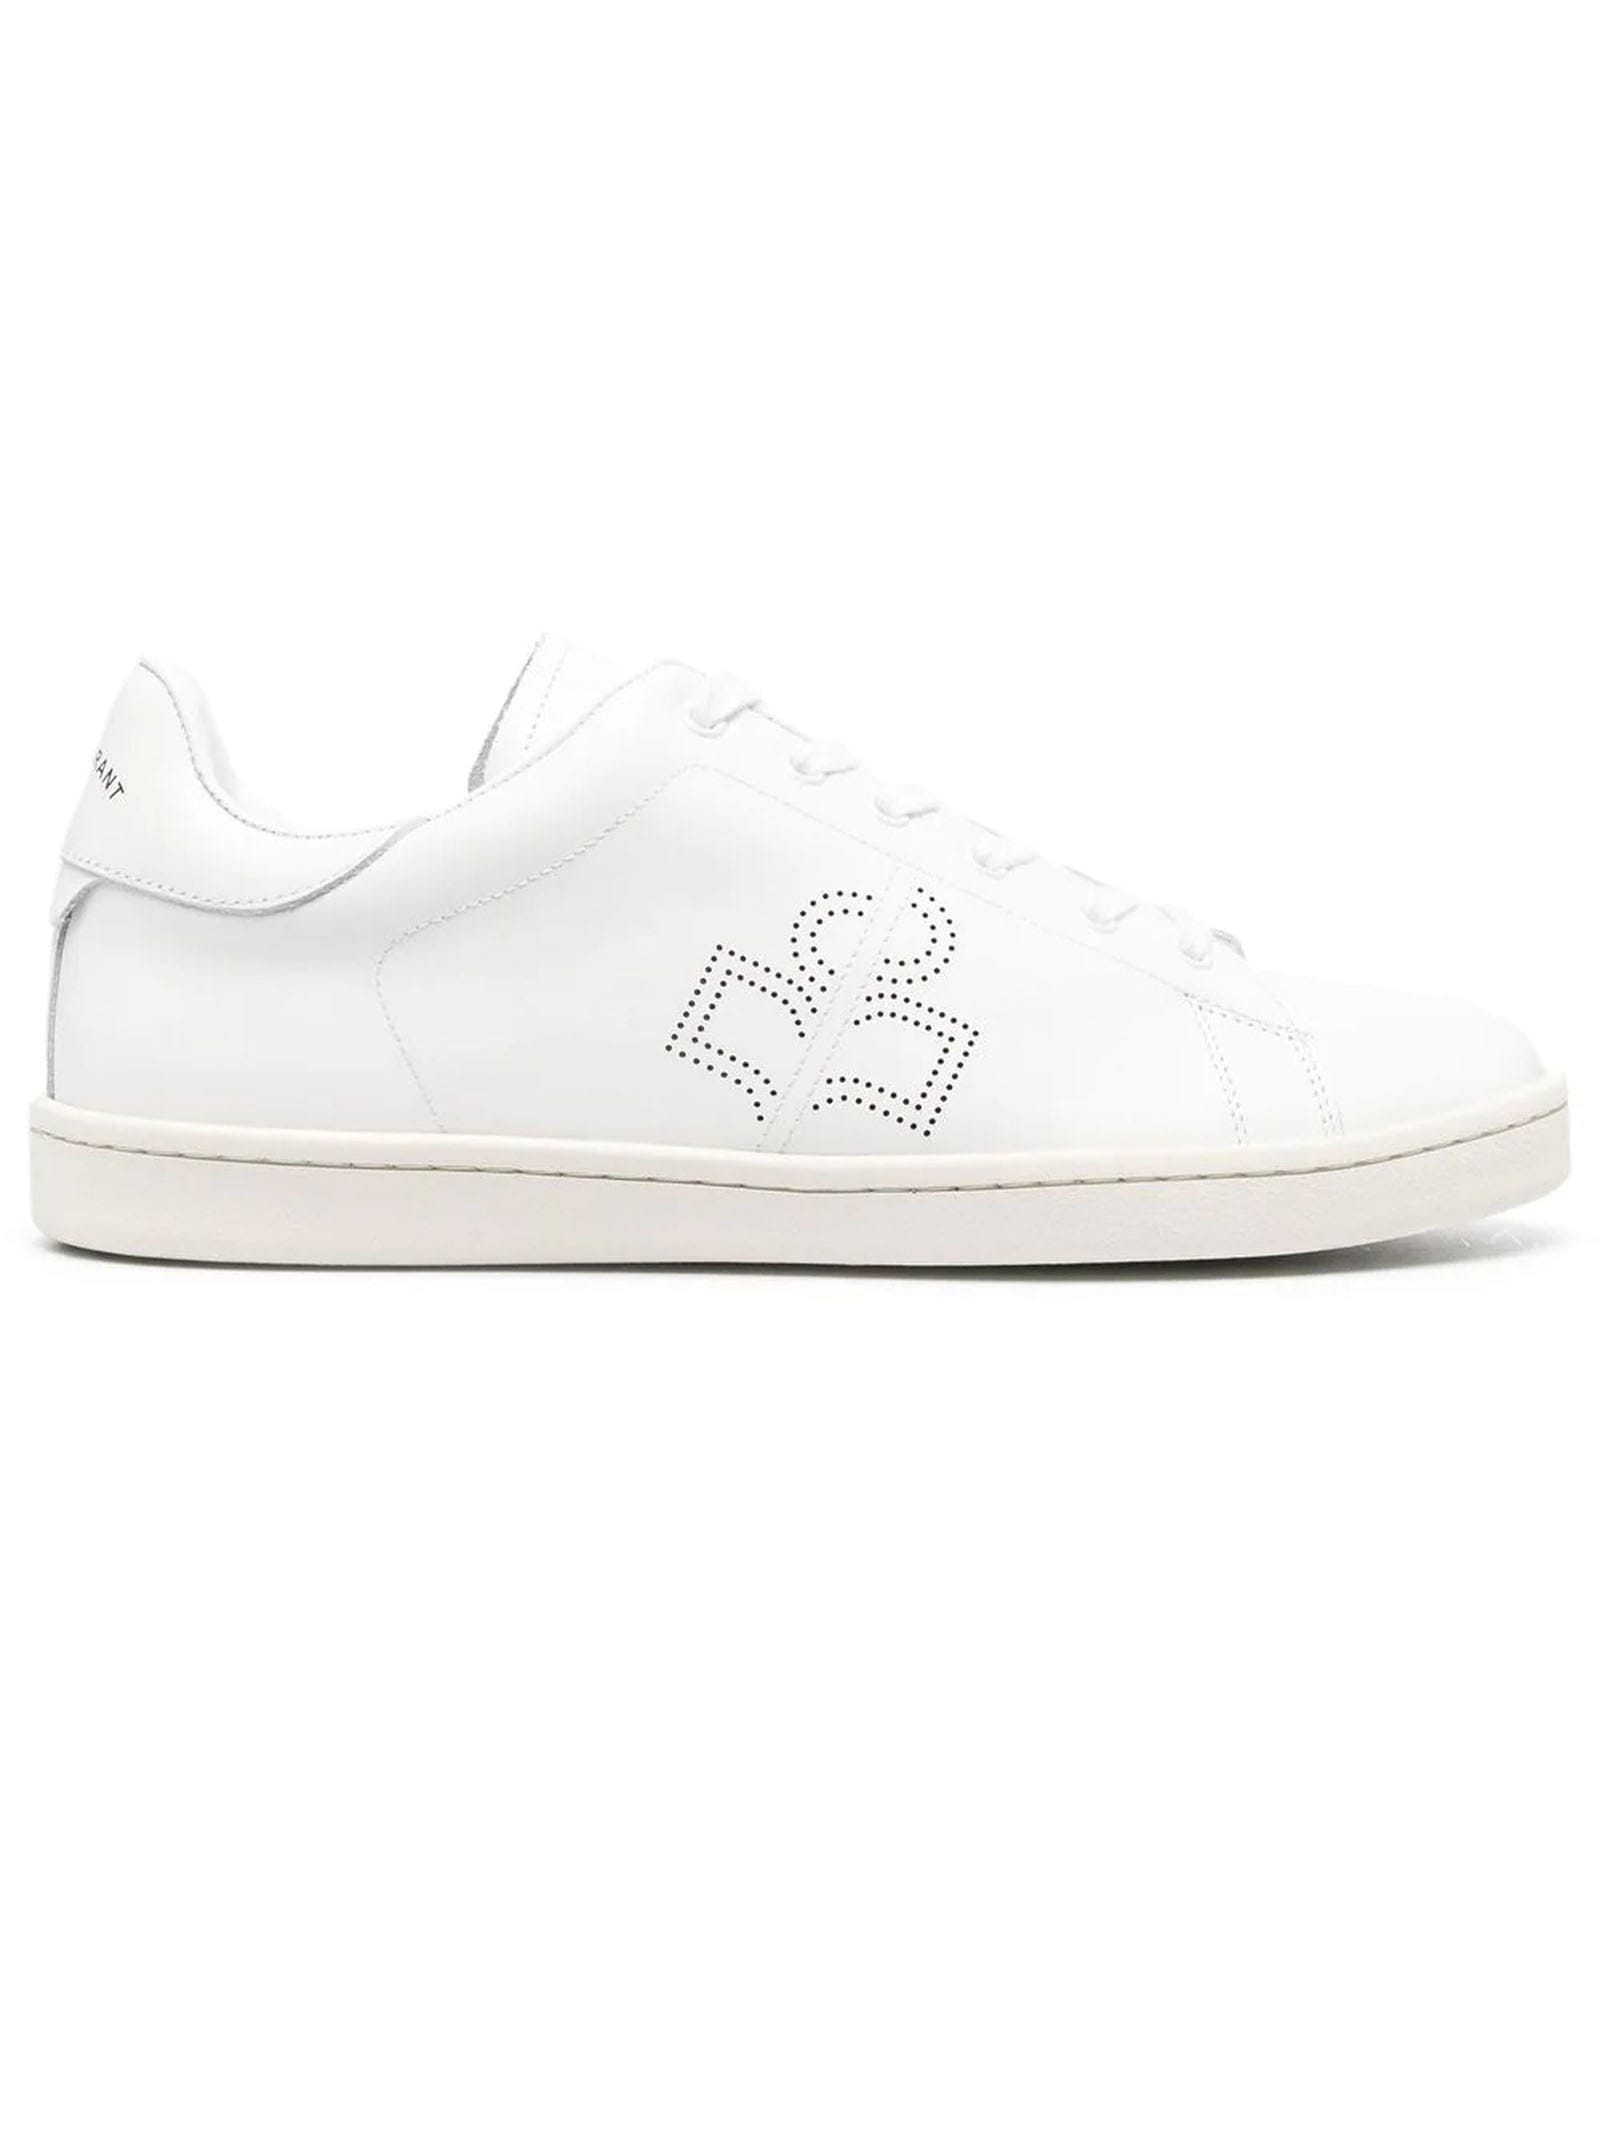 Isabel Marant White Calf Leather Barth Sneakers